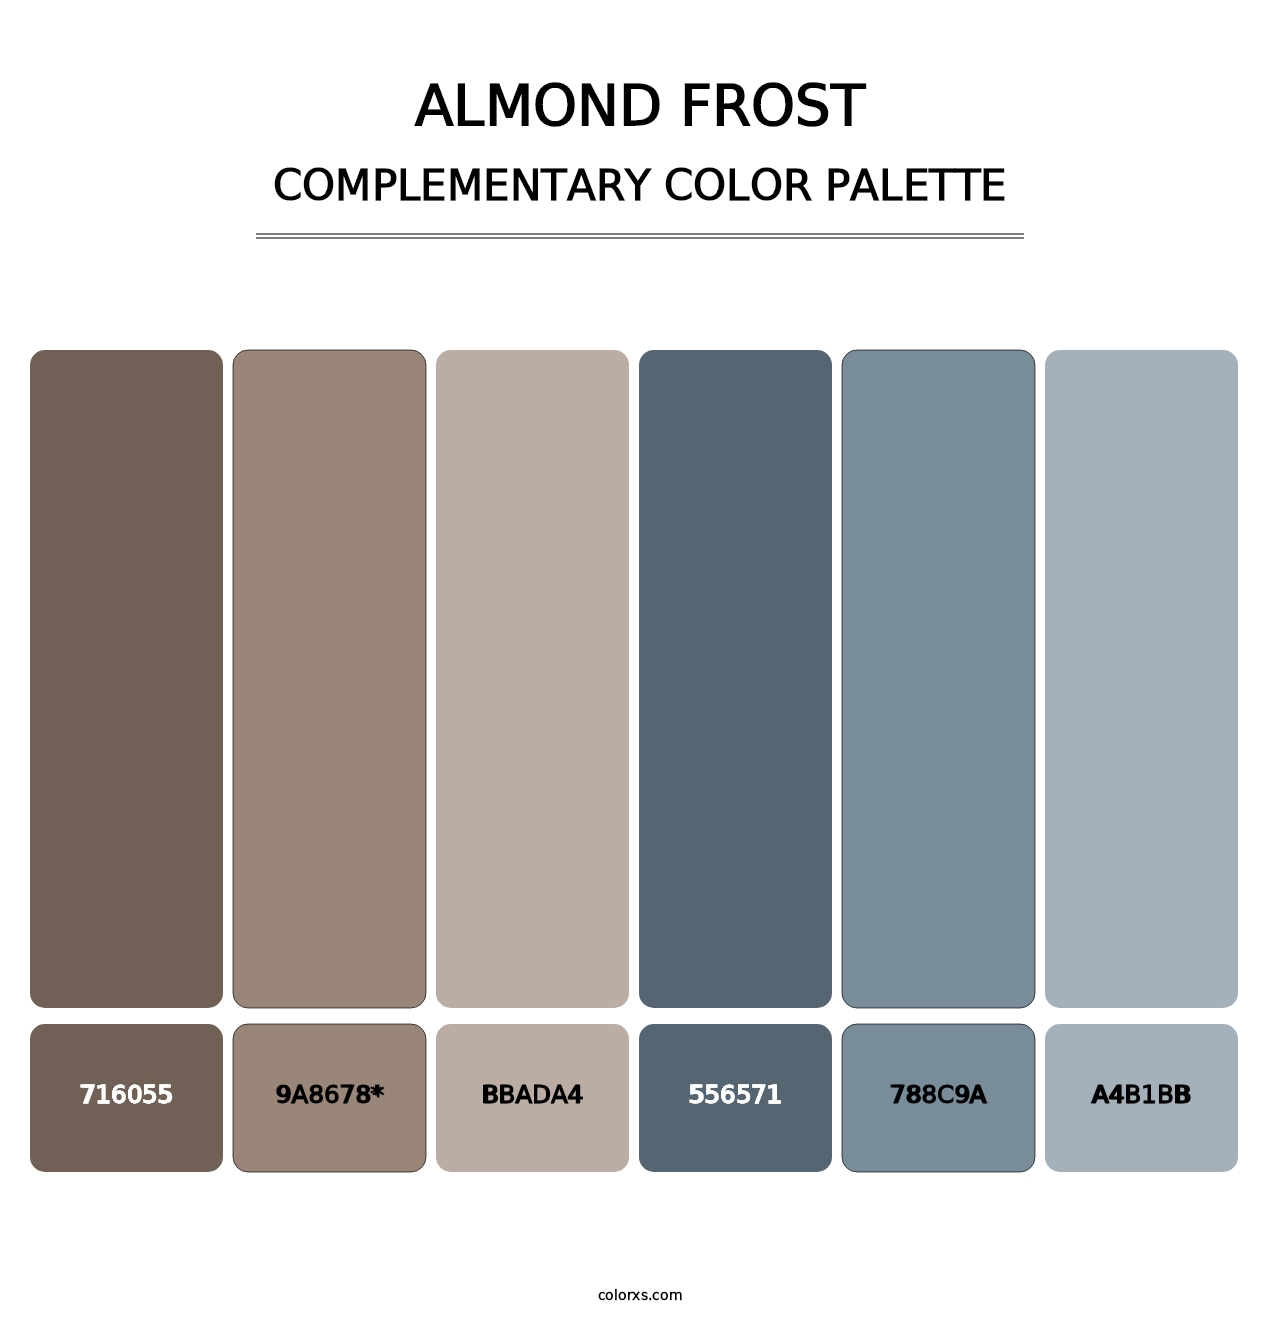 Almond Frost - Complementary Color Palette